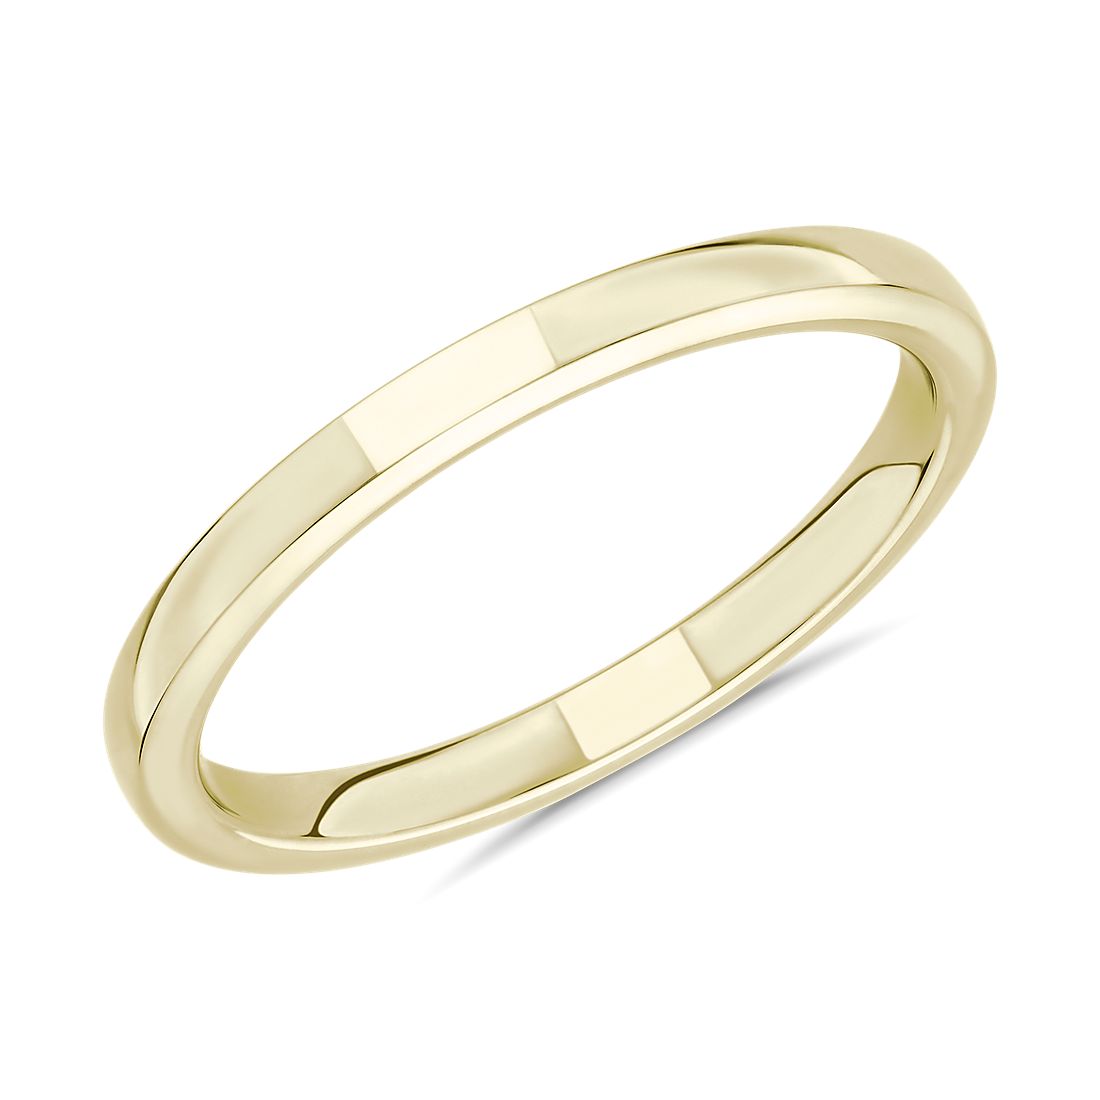 Skyline Comfort Fit Wedding Ring in 14k Yellow Gold (2 mm)